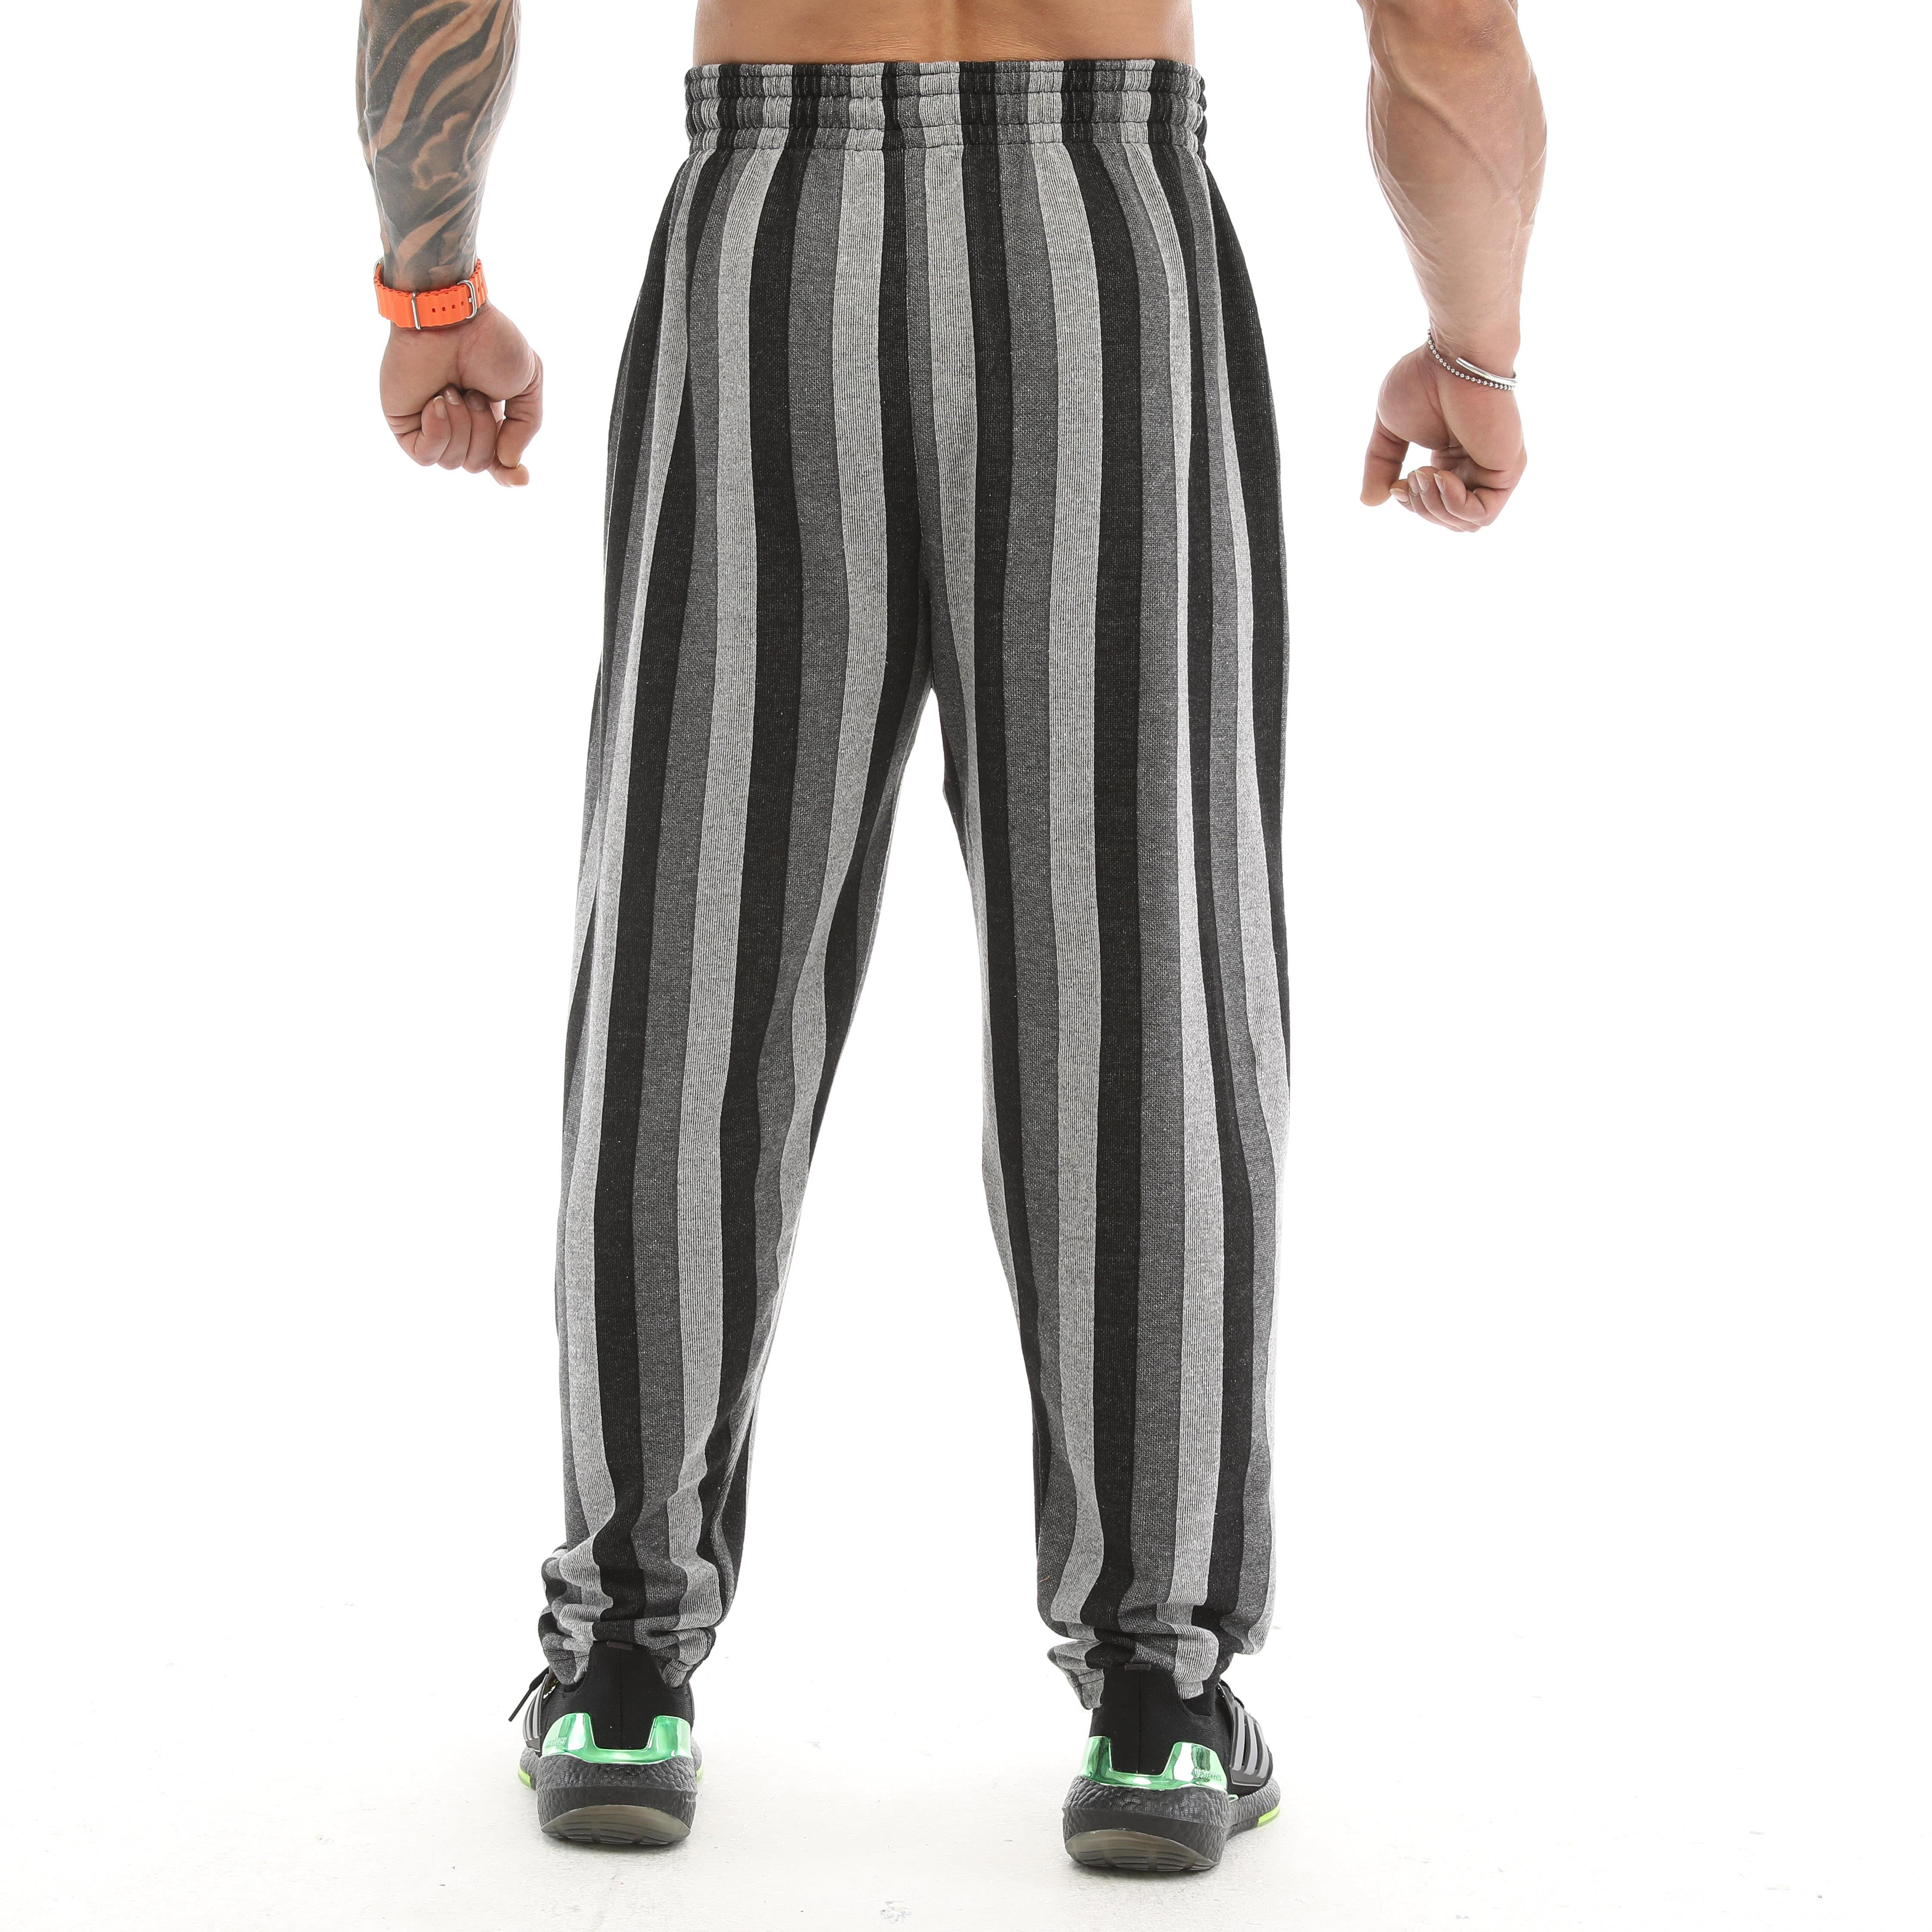 Men's Baggy Sweatpants With Pockets, Oldschool Gym Muscle Pants Gift for  Bodybuilders -  Denmark